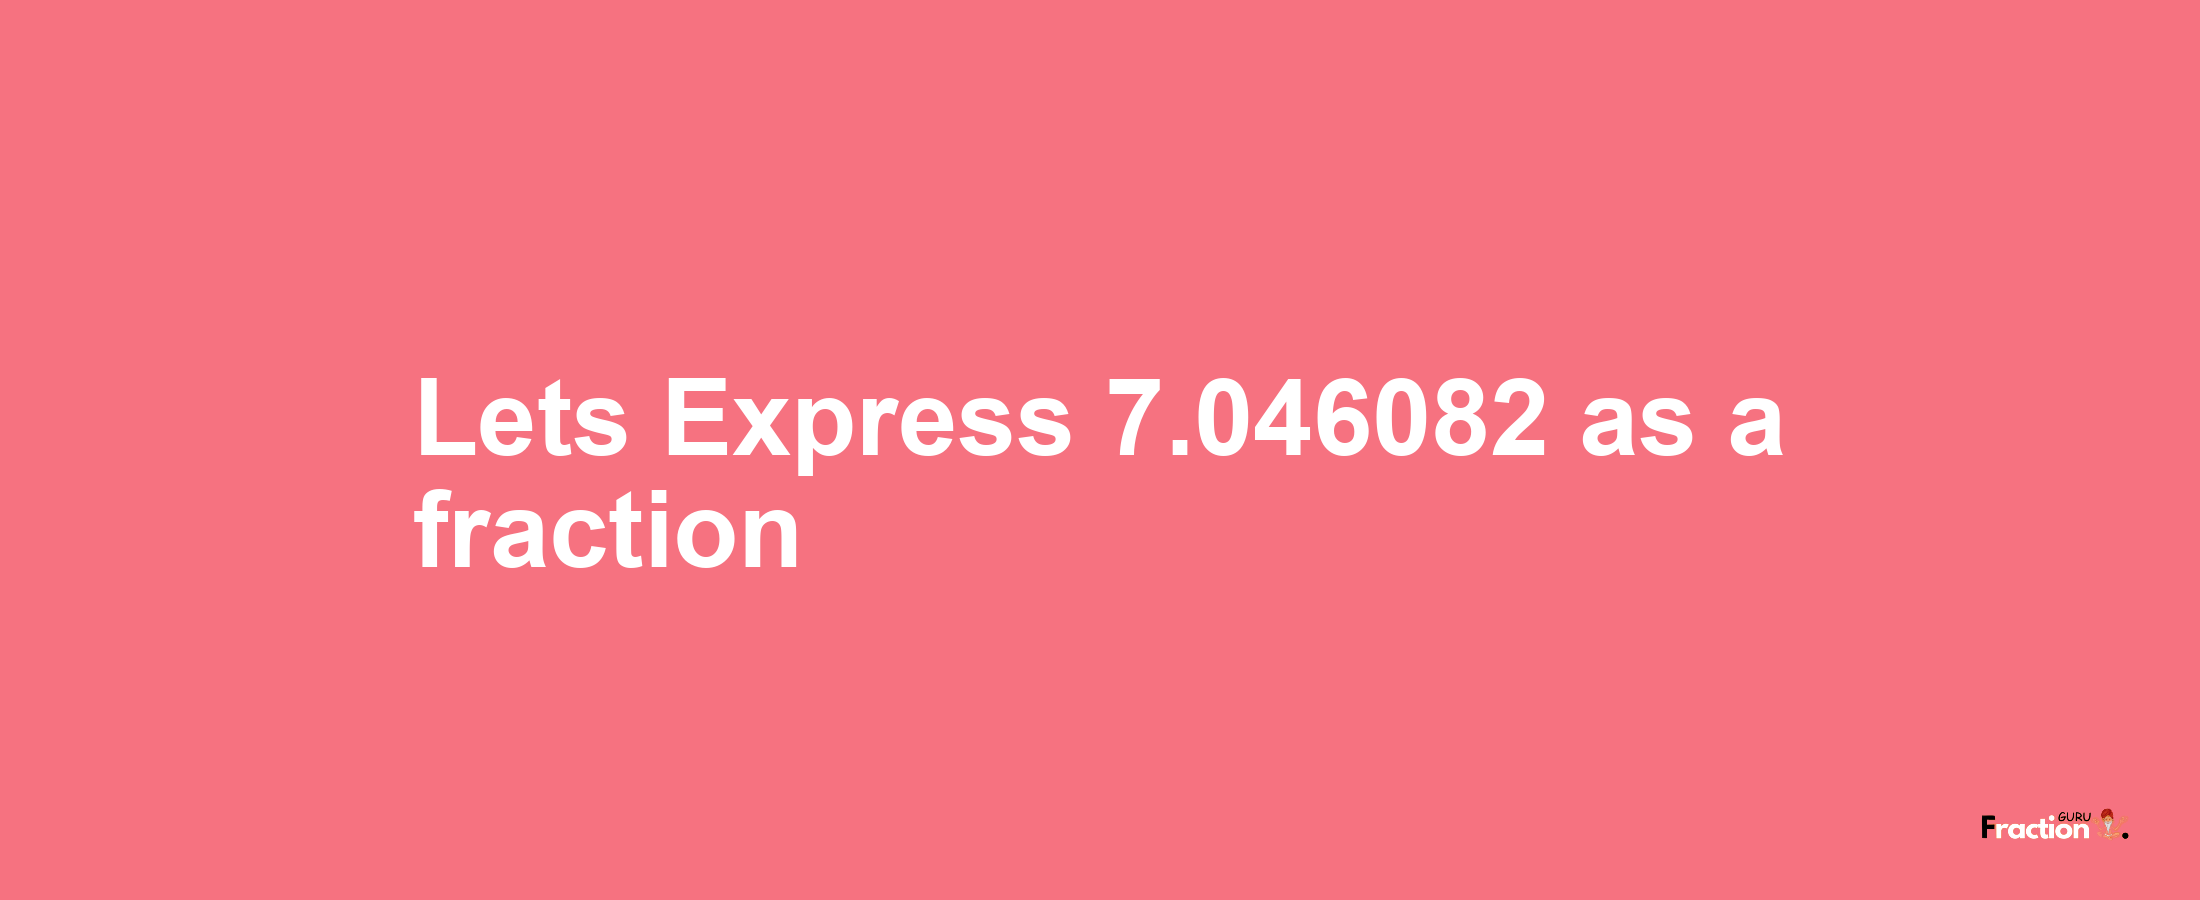 Lets Express 7.046082 as afraction